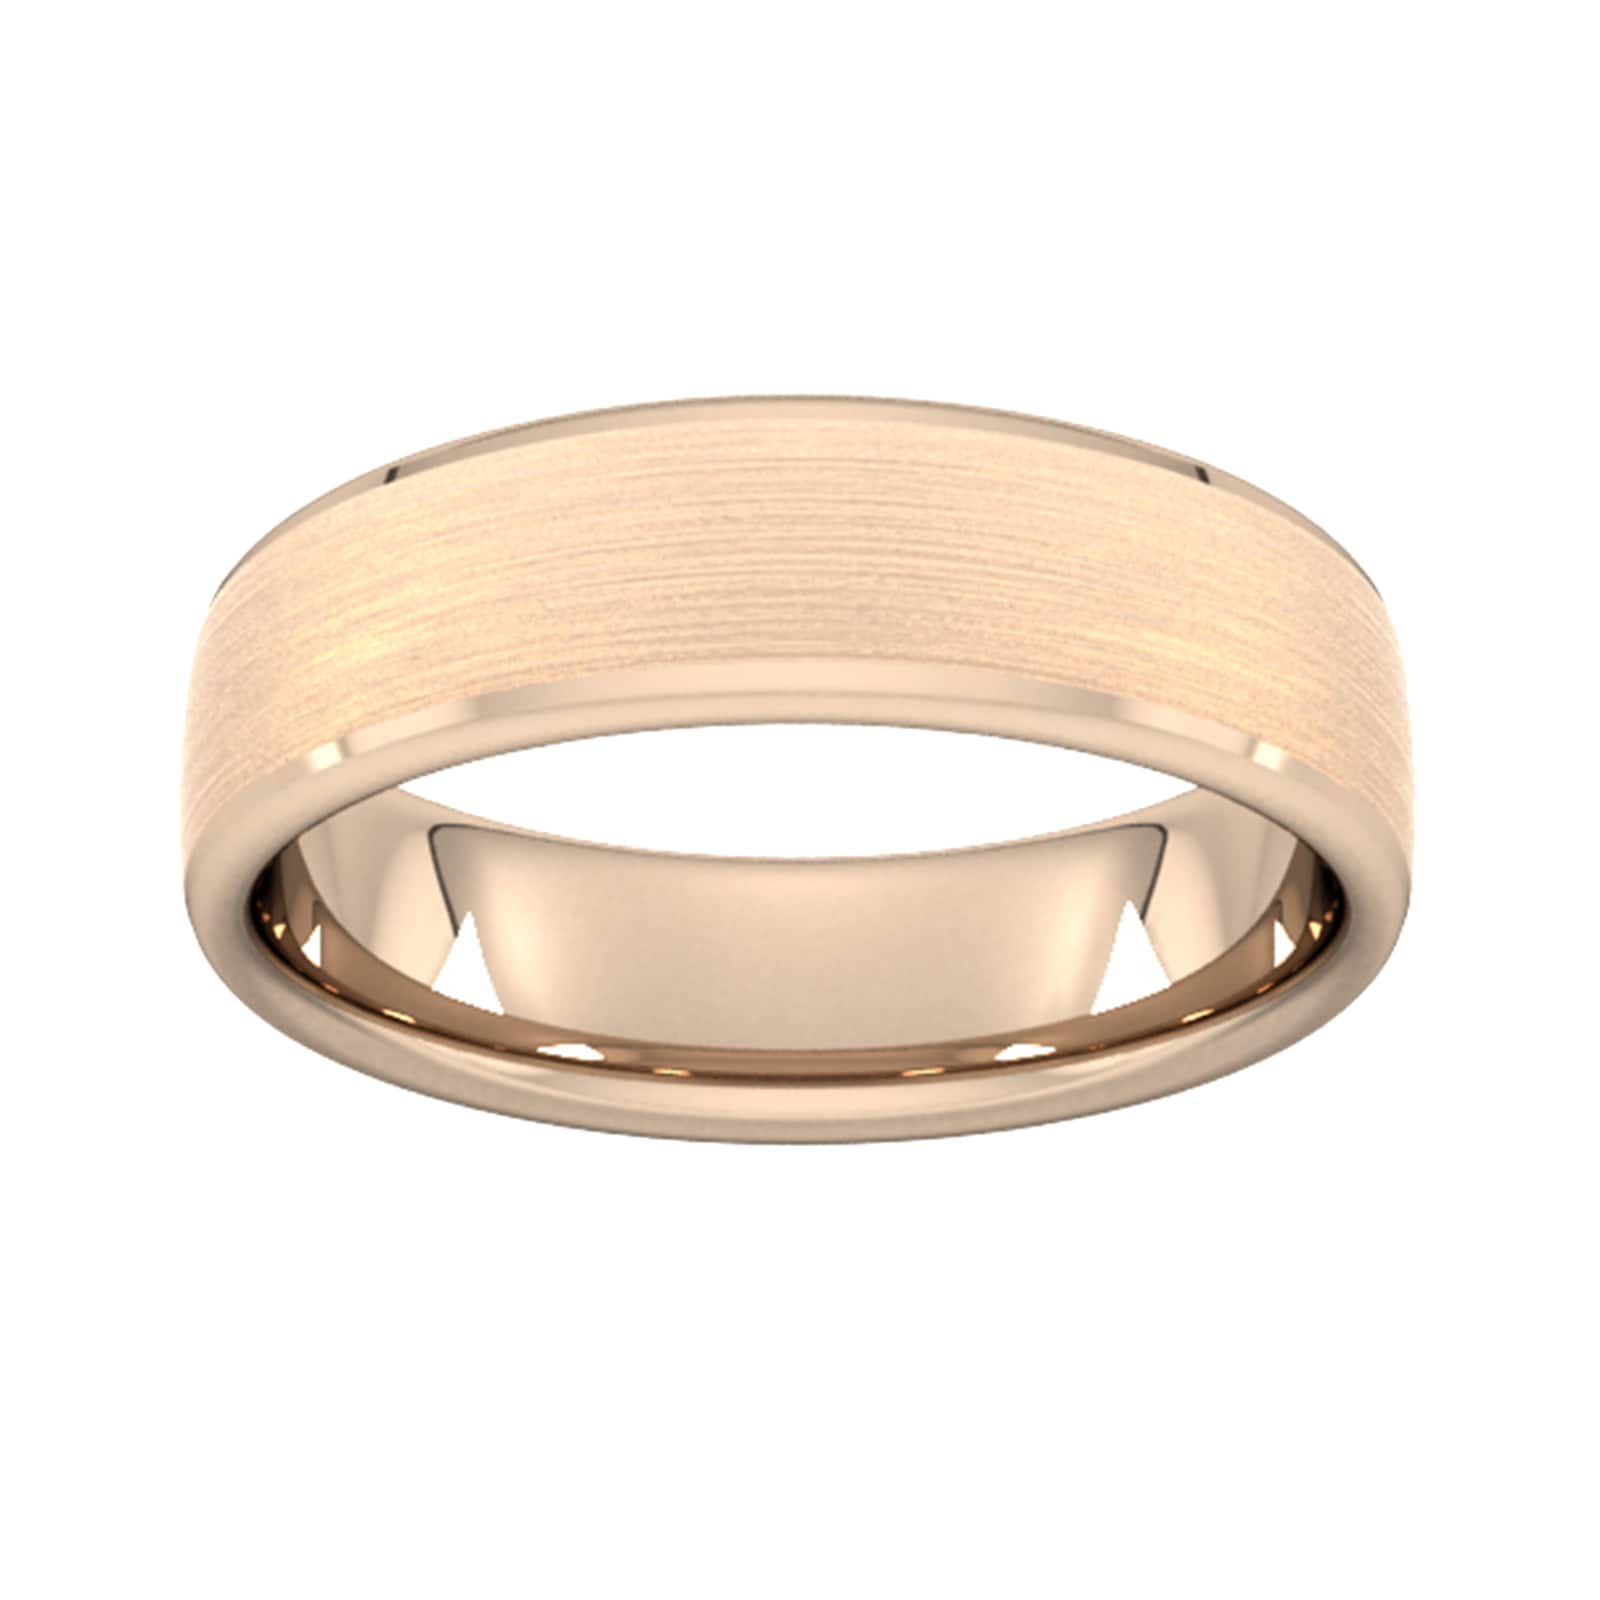 6mm Slight Court Standard Polished Chamfered Edges With Matt Centre Wedding Ring In 9 Carat Rose Gold - Ring Size O